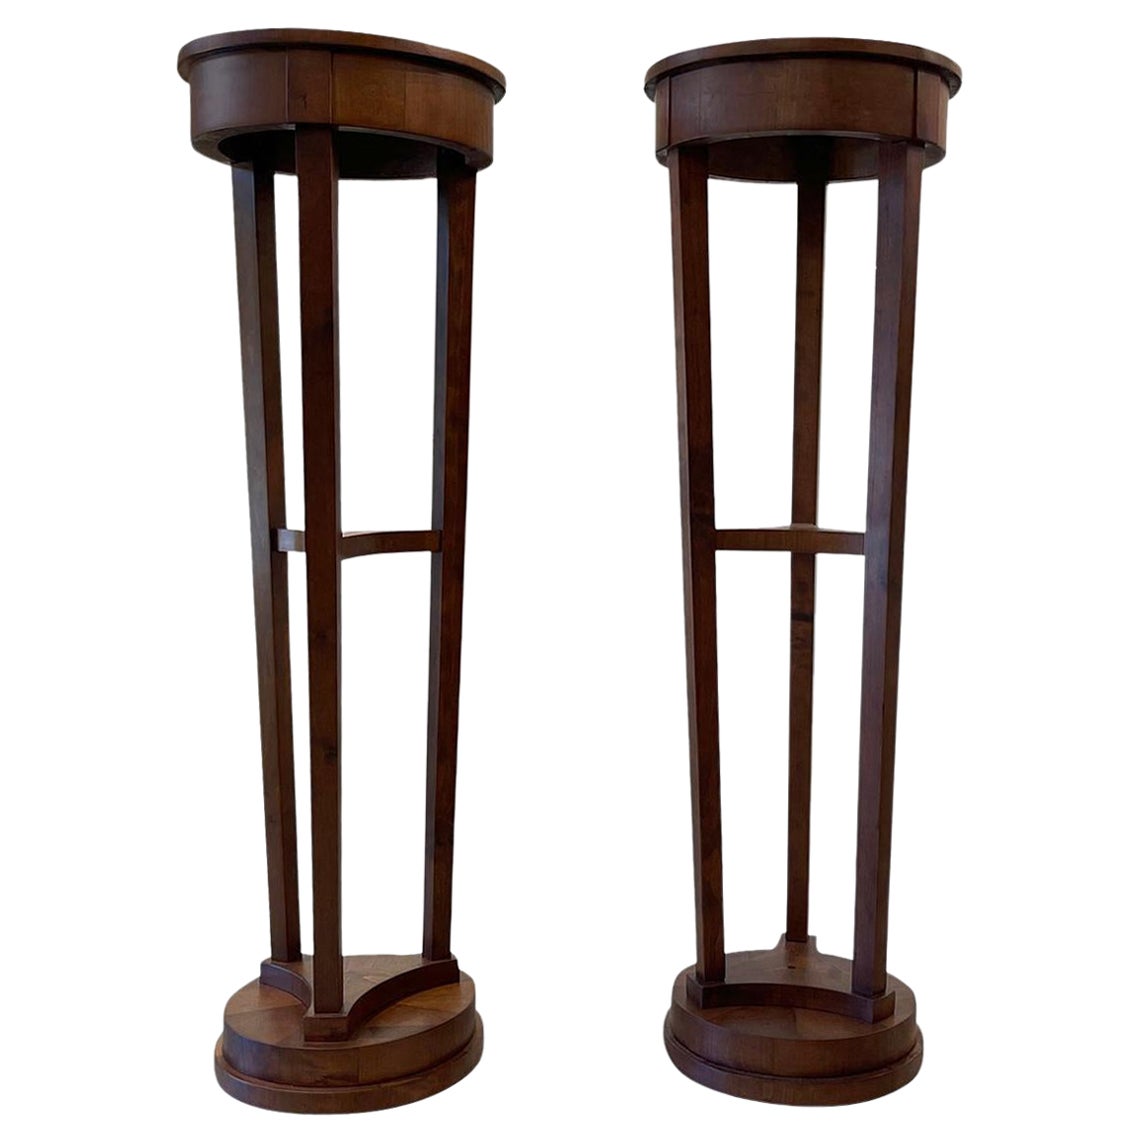 19th Century French Empire Pair of Antique Polished Mahogany Pedestals For Sale